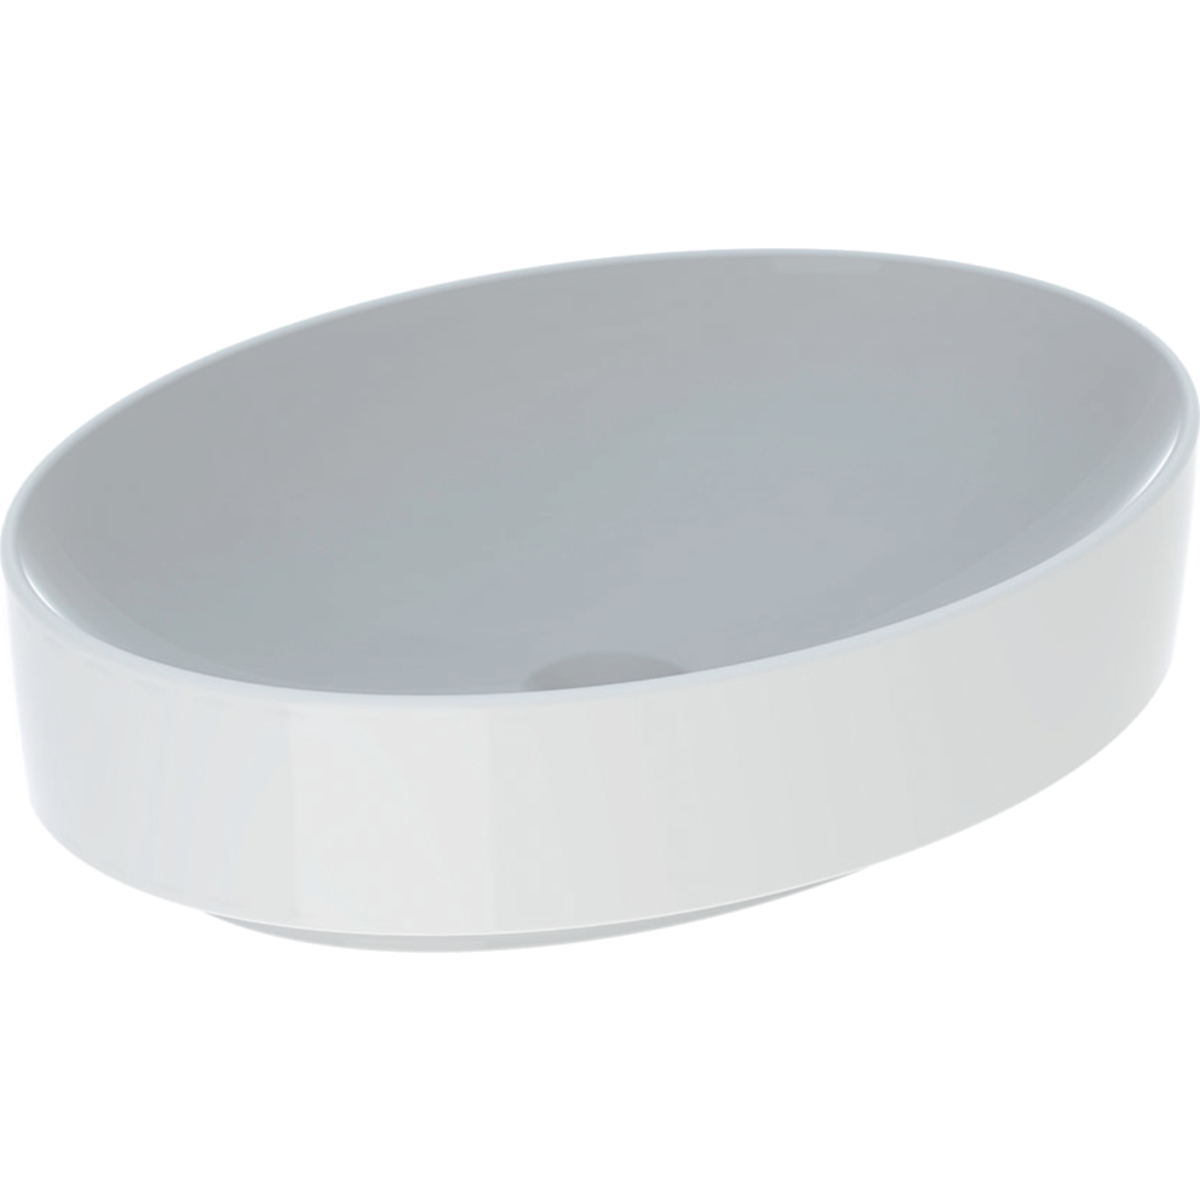 VariForm oval 55x40cm lay-on nth basin without overflow